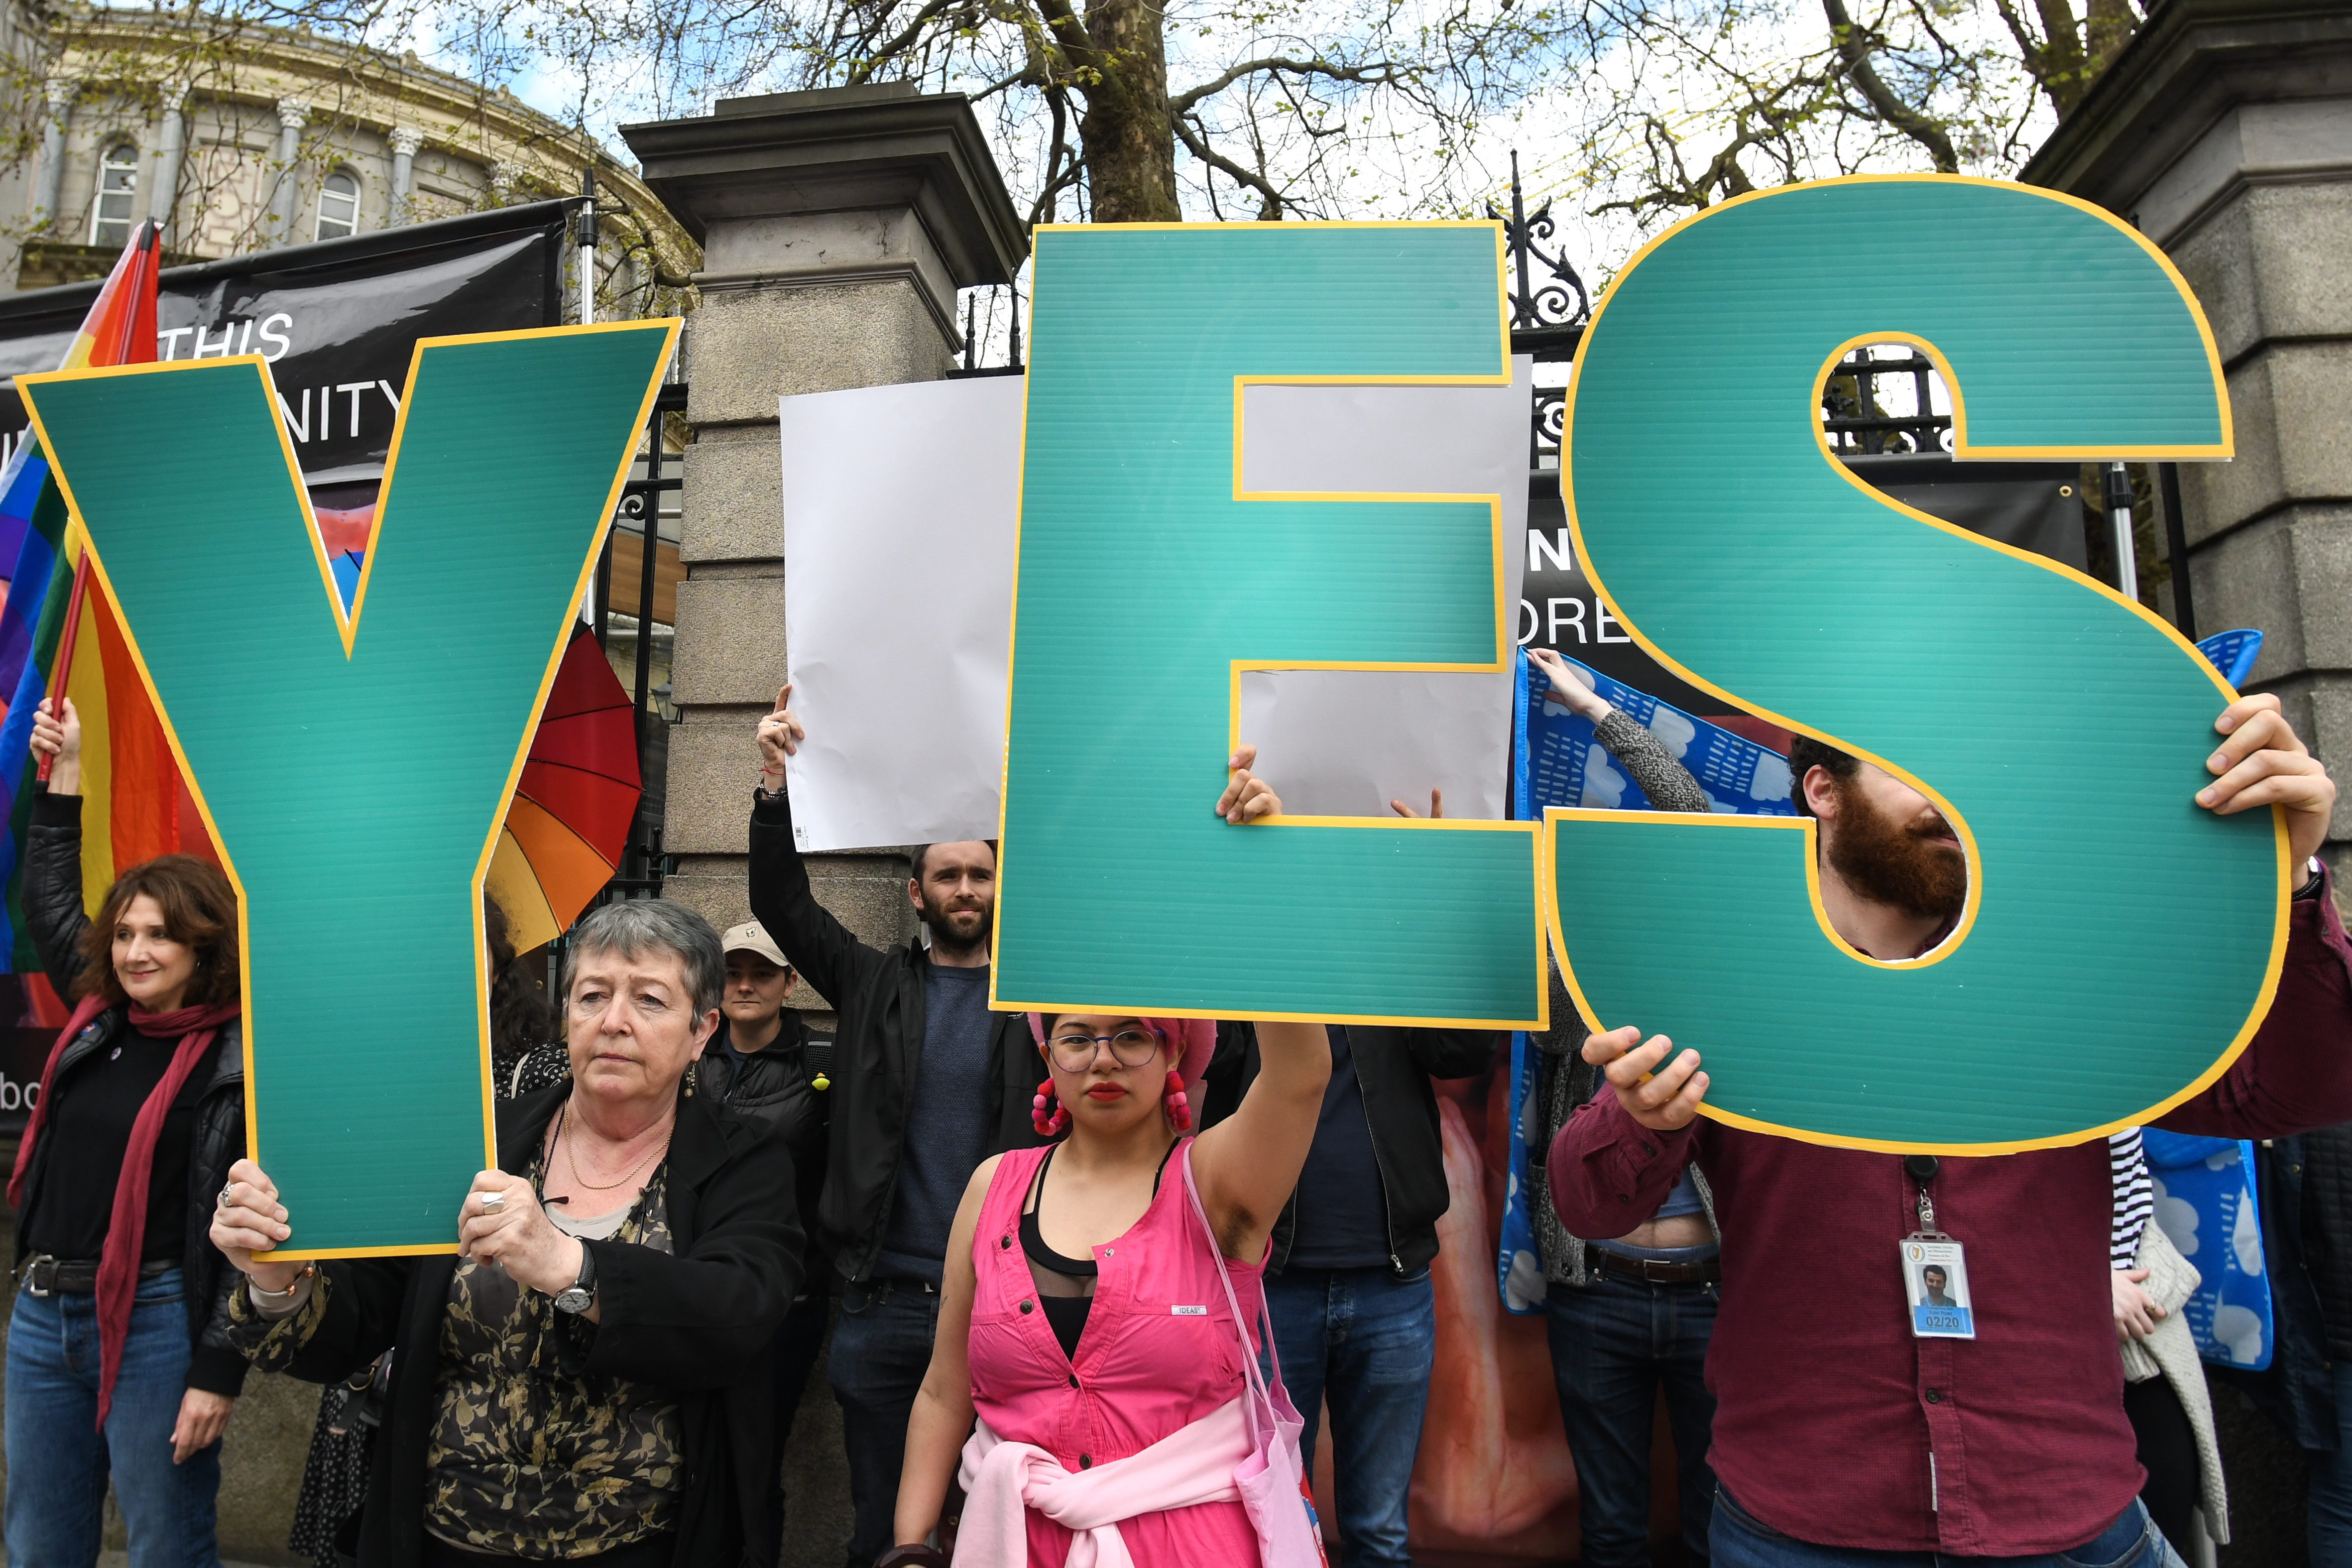 'Yes' vote campaigners cover anti-abortion group's graphic images related to pregnancy and abortion, with Irish and rainbow flags, and white billboards, outside Leinster House, the Irish Parliament, on Friday, May 4, 2018, in Dublin, Ireland. (Artur Widak—NurPhoto via Getty Images)